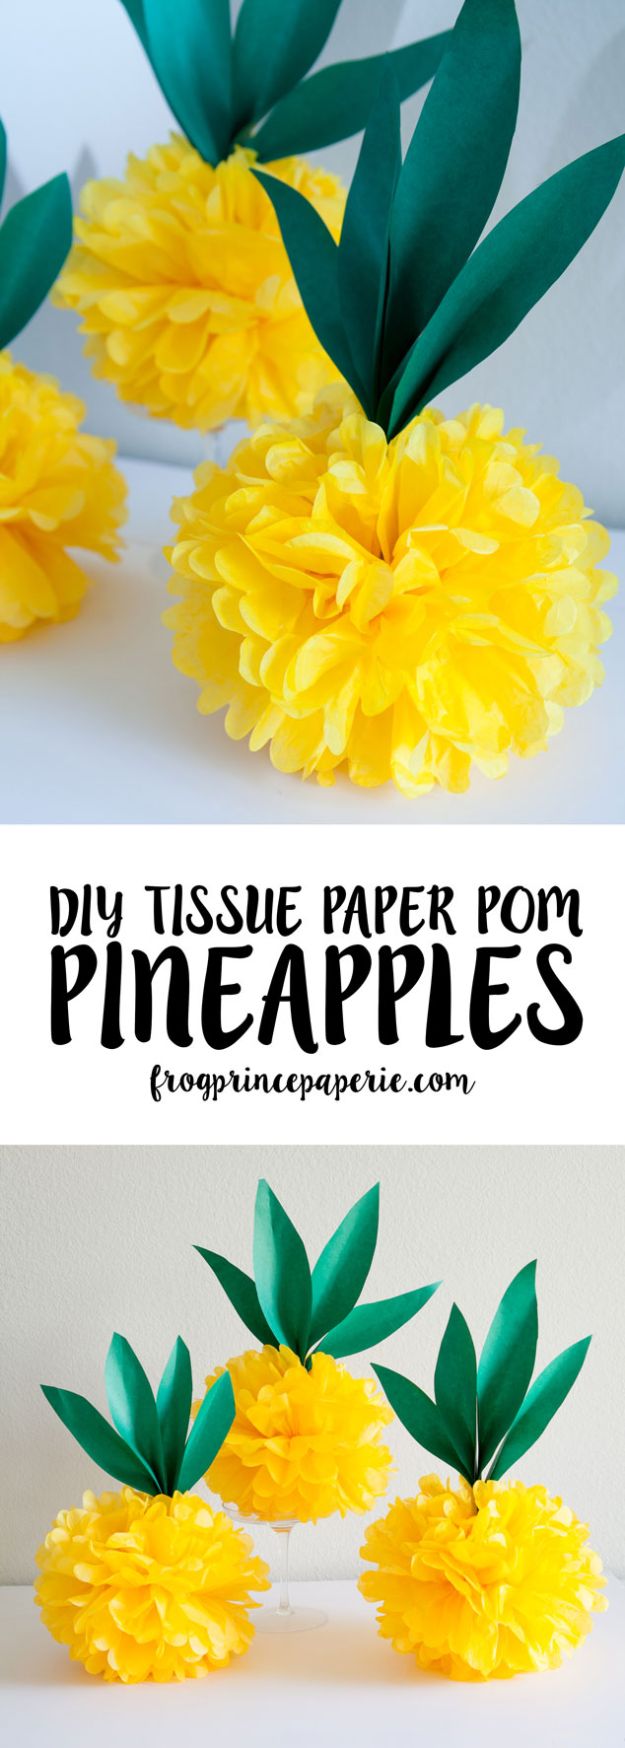 Pineapple Crafts - Luau Tissue Paper Pineapple Pouf - Cute Craft Projects That Make Cool DIY Gifts - Wall Decor, Bedroom Art, Jewelry Idea